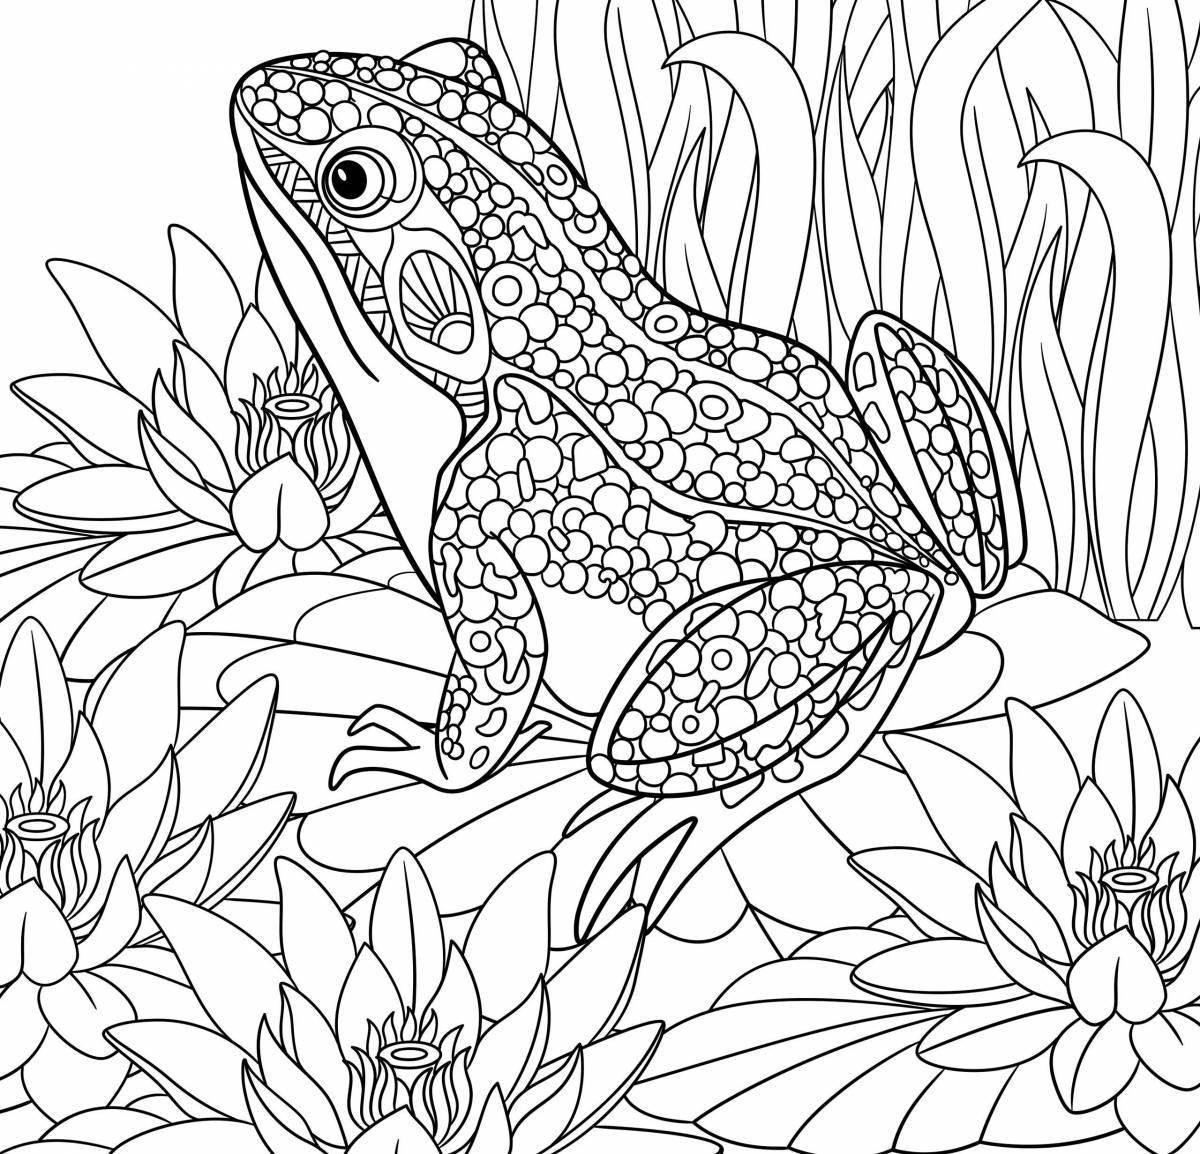 Coloring page generous amazing animals